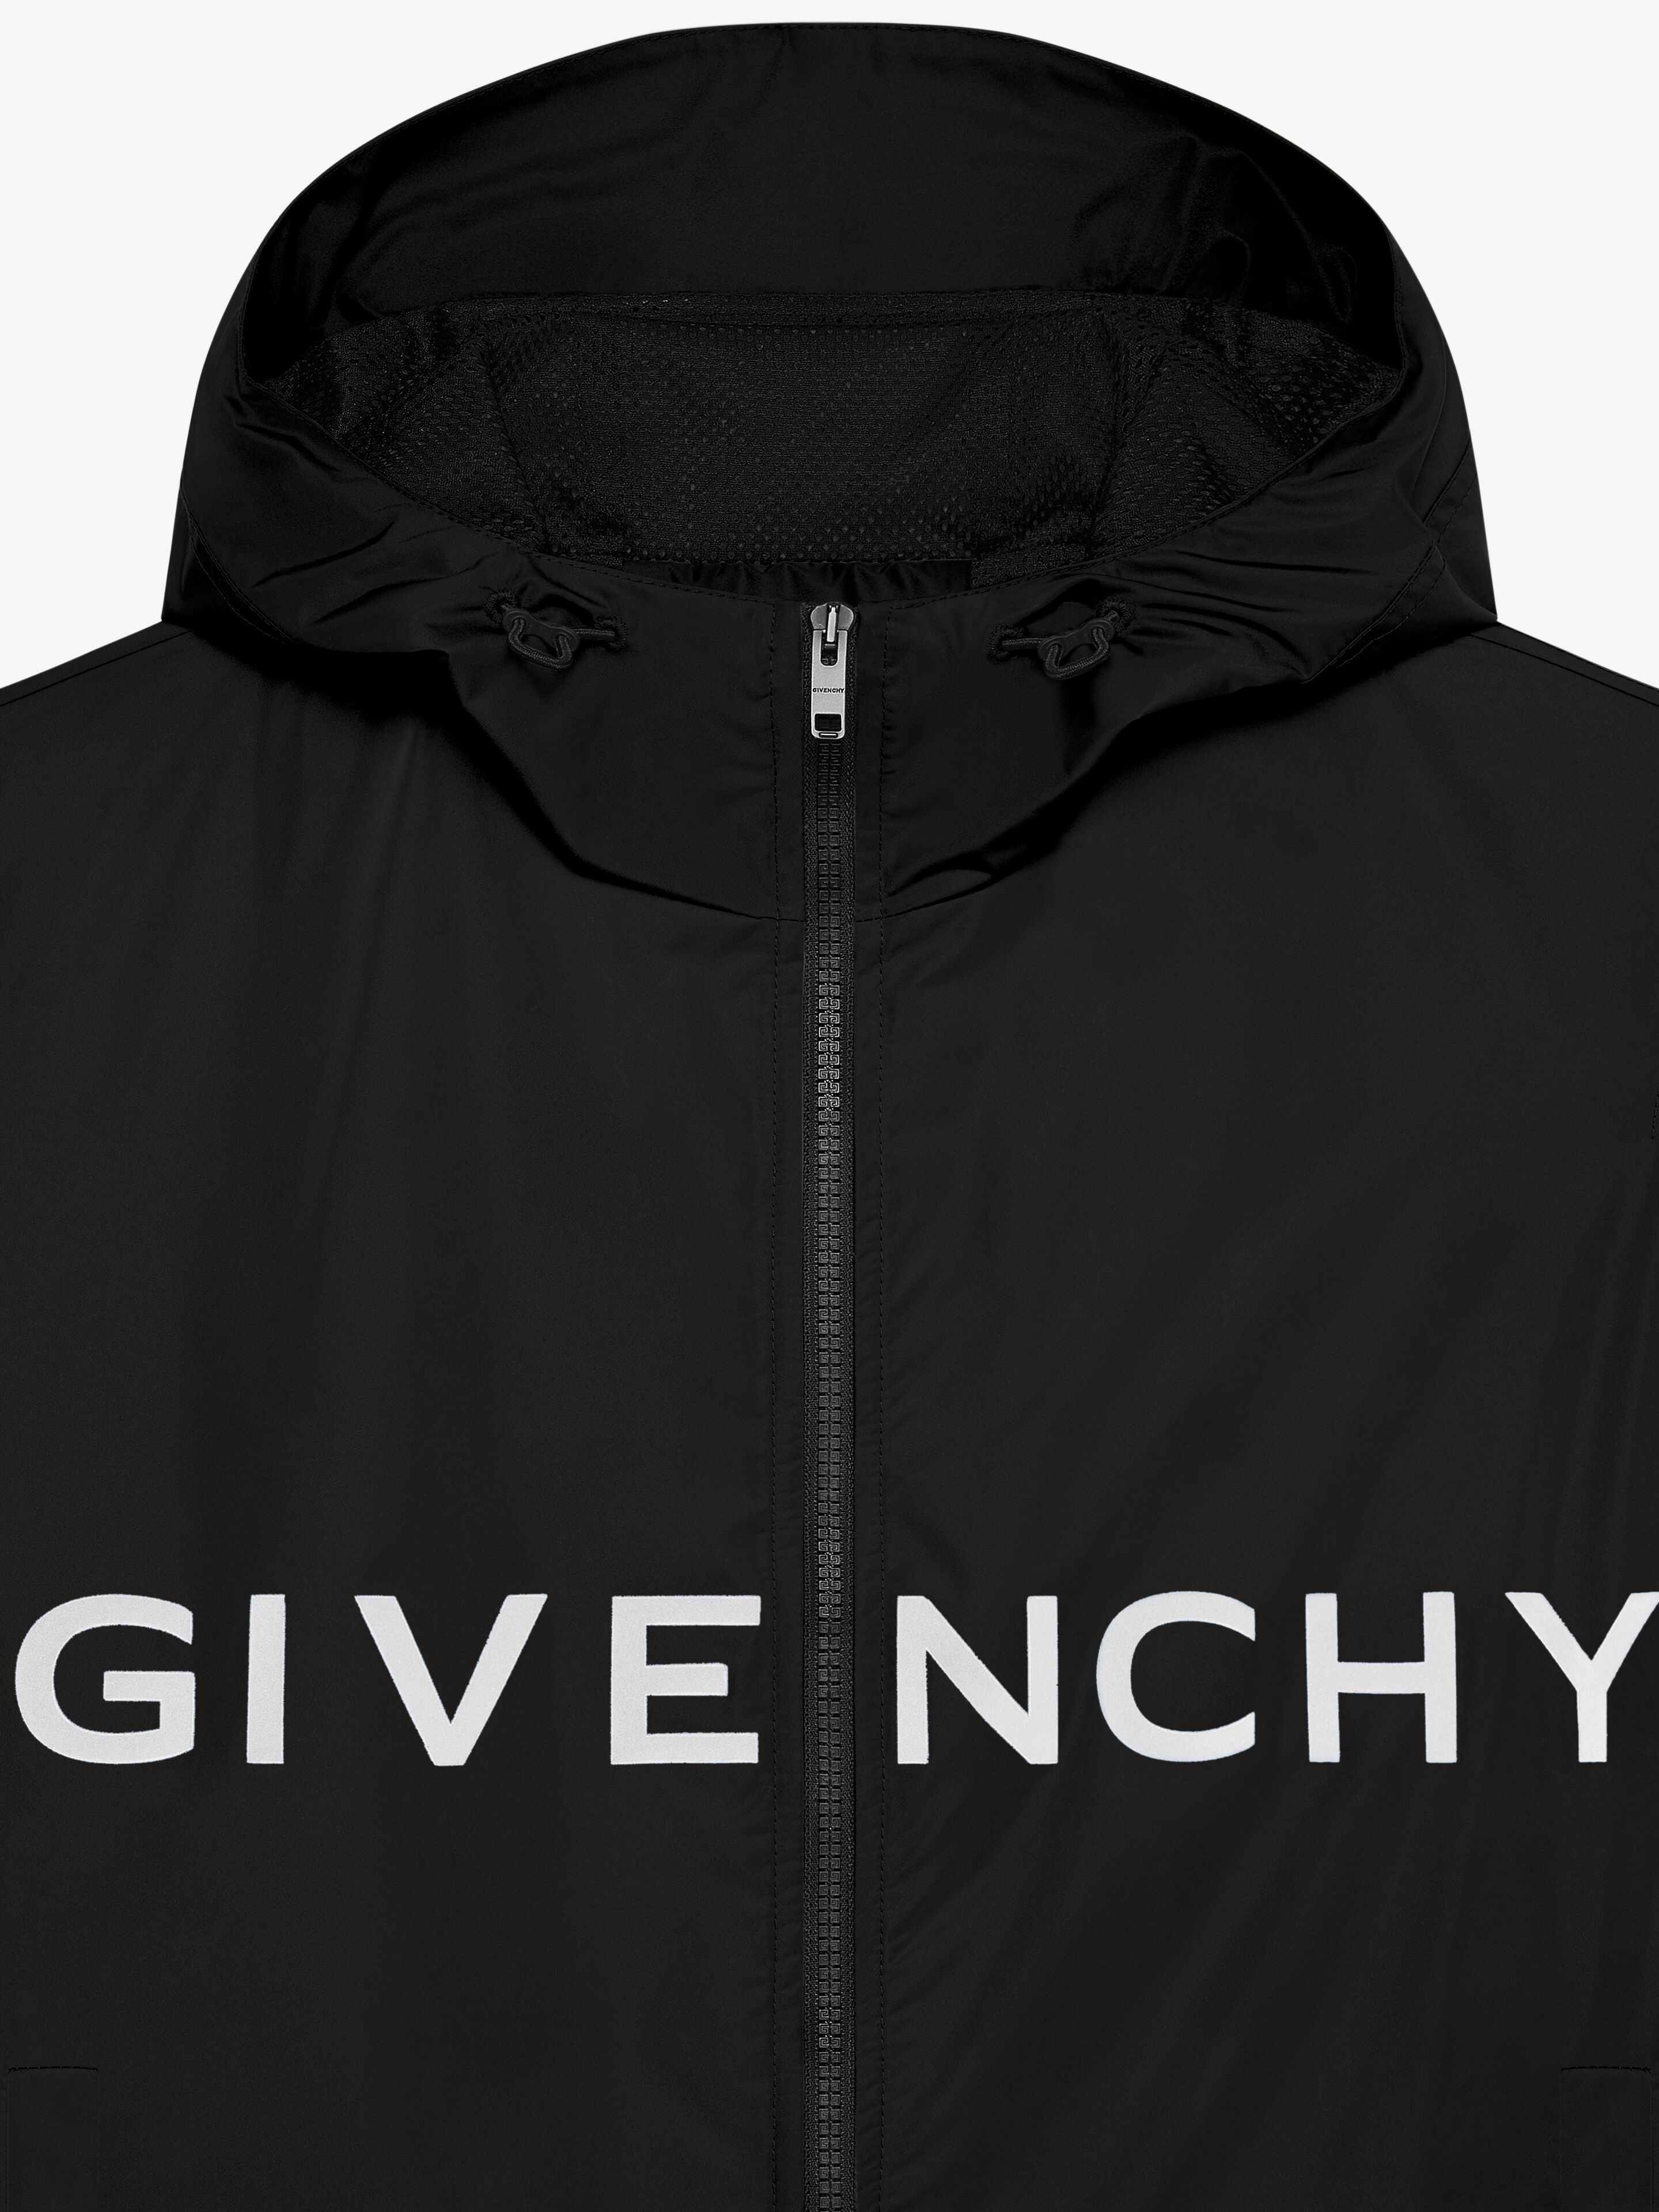 GIVENCHY WINDBREAKER IN TECHNICAL FABRIC